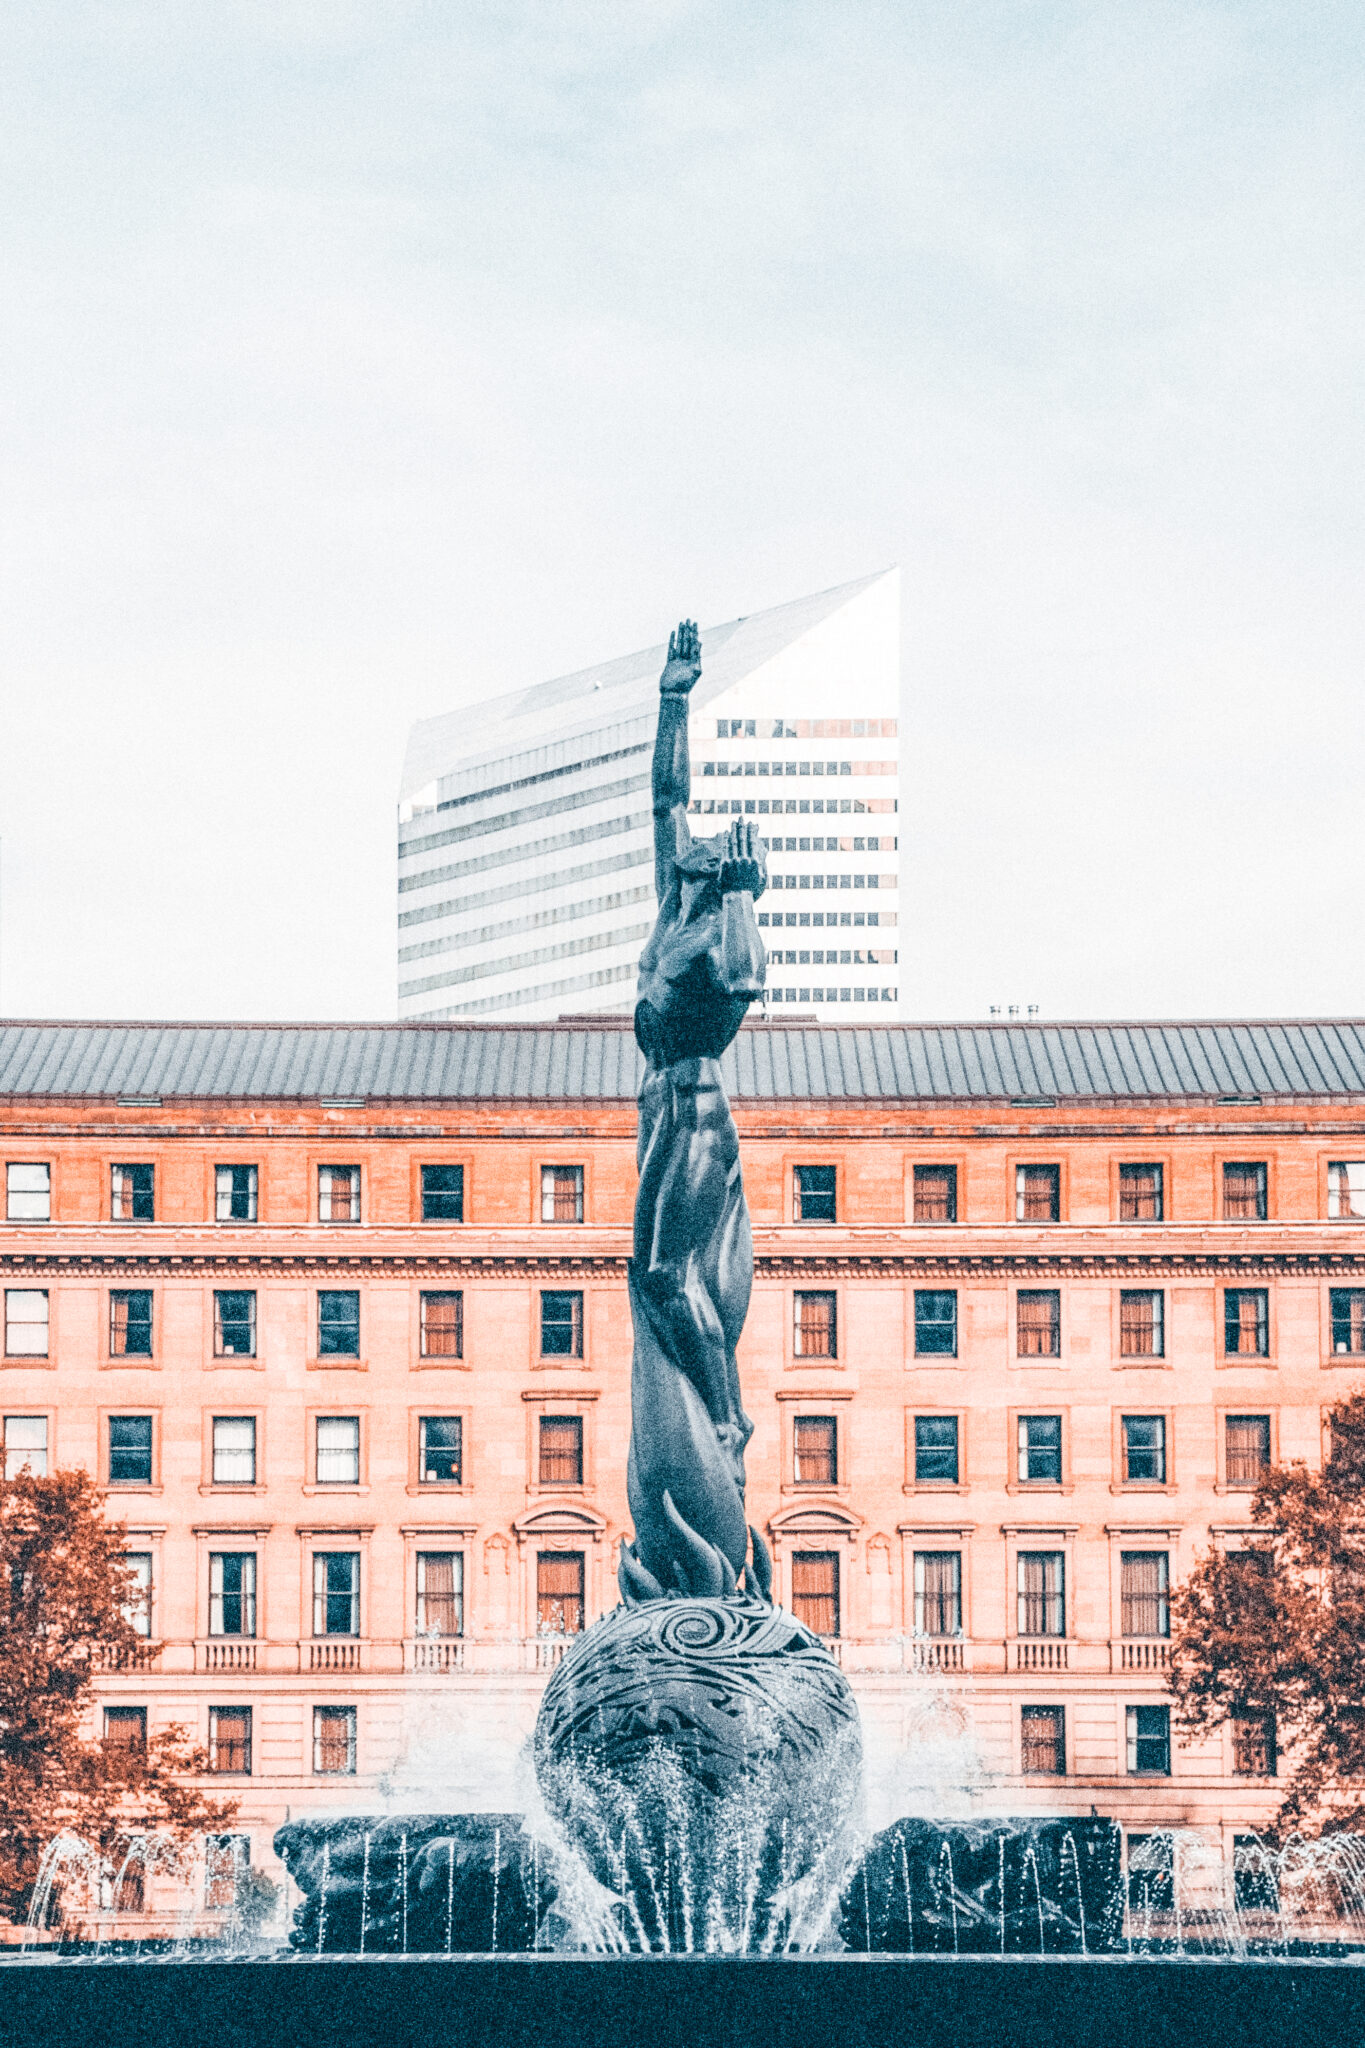 A statue reaching to the sky in Cleveland, Ohio. This article covers what to do when visiting Cleveland, Ohio.